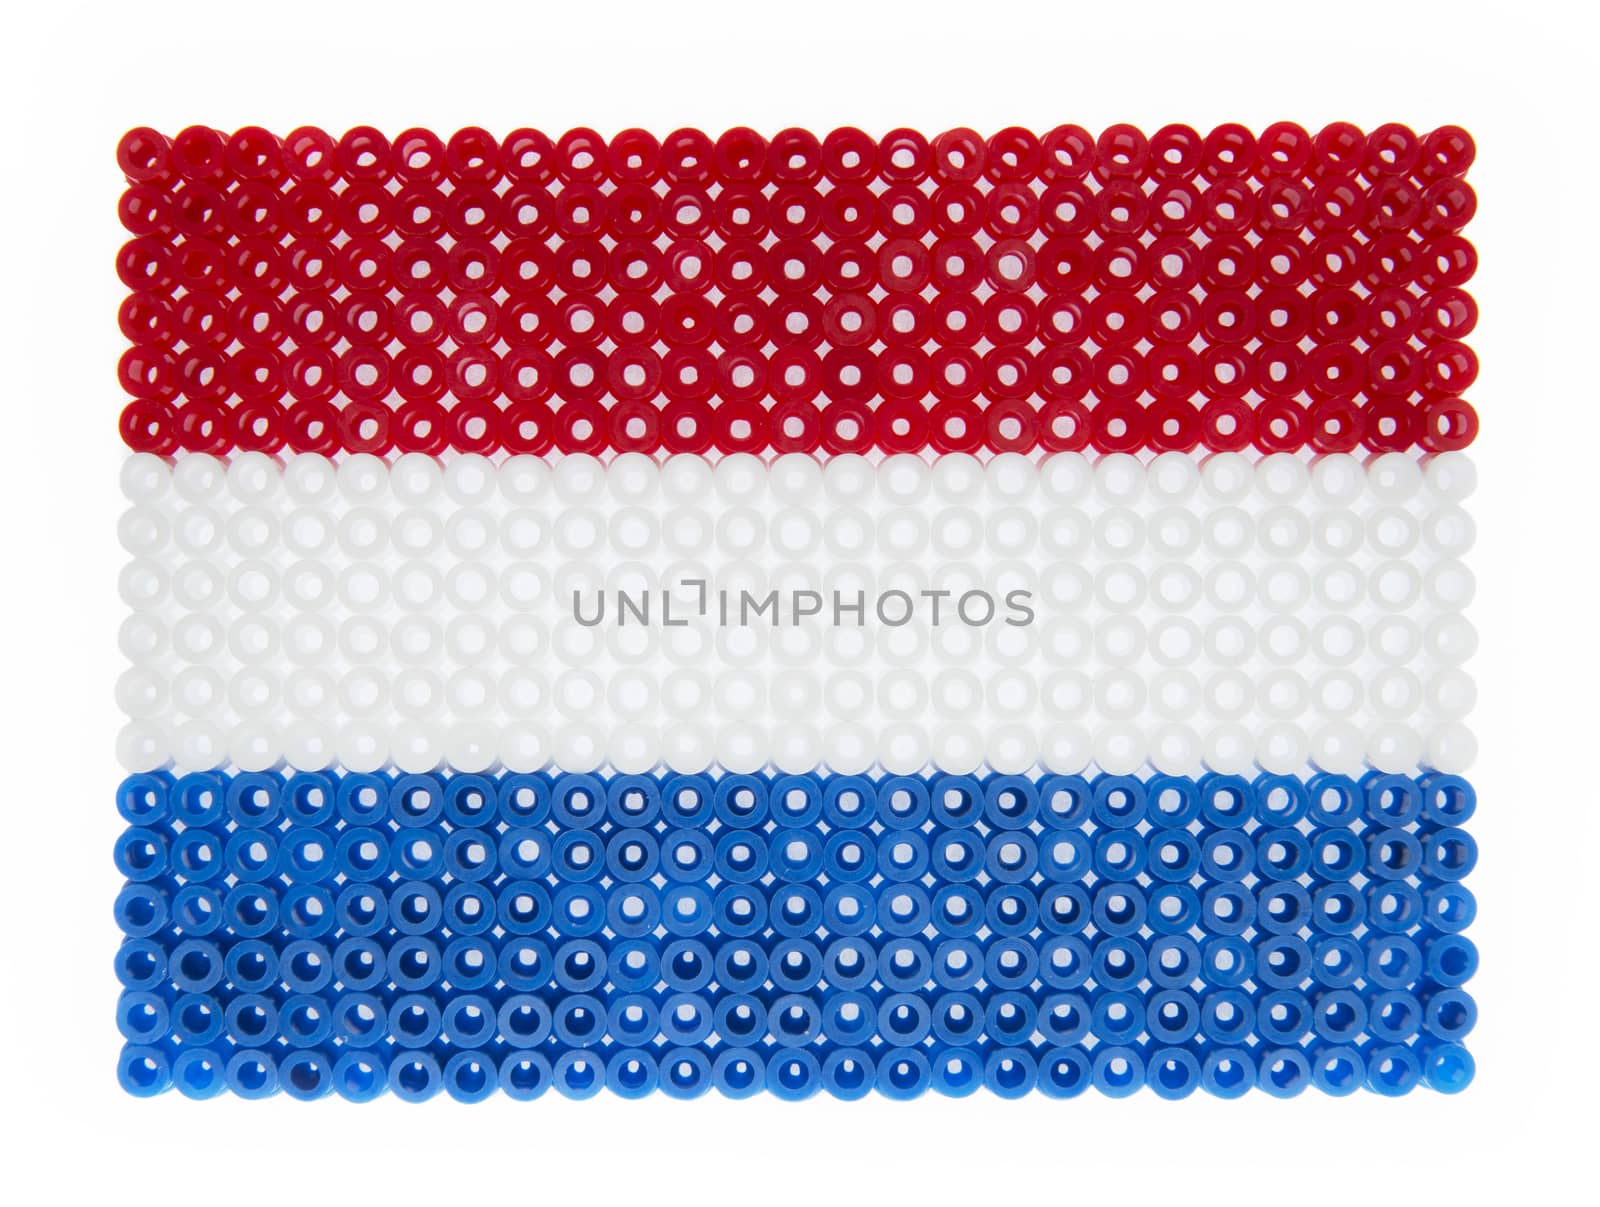 Dutch Flag made of plastic pearls